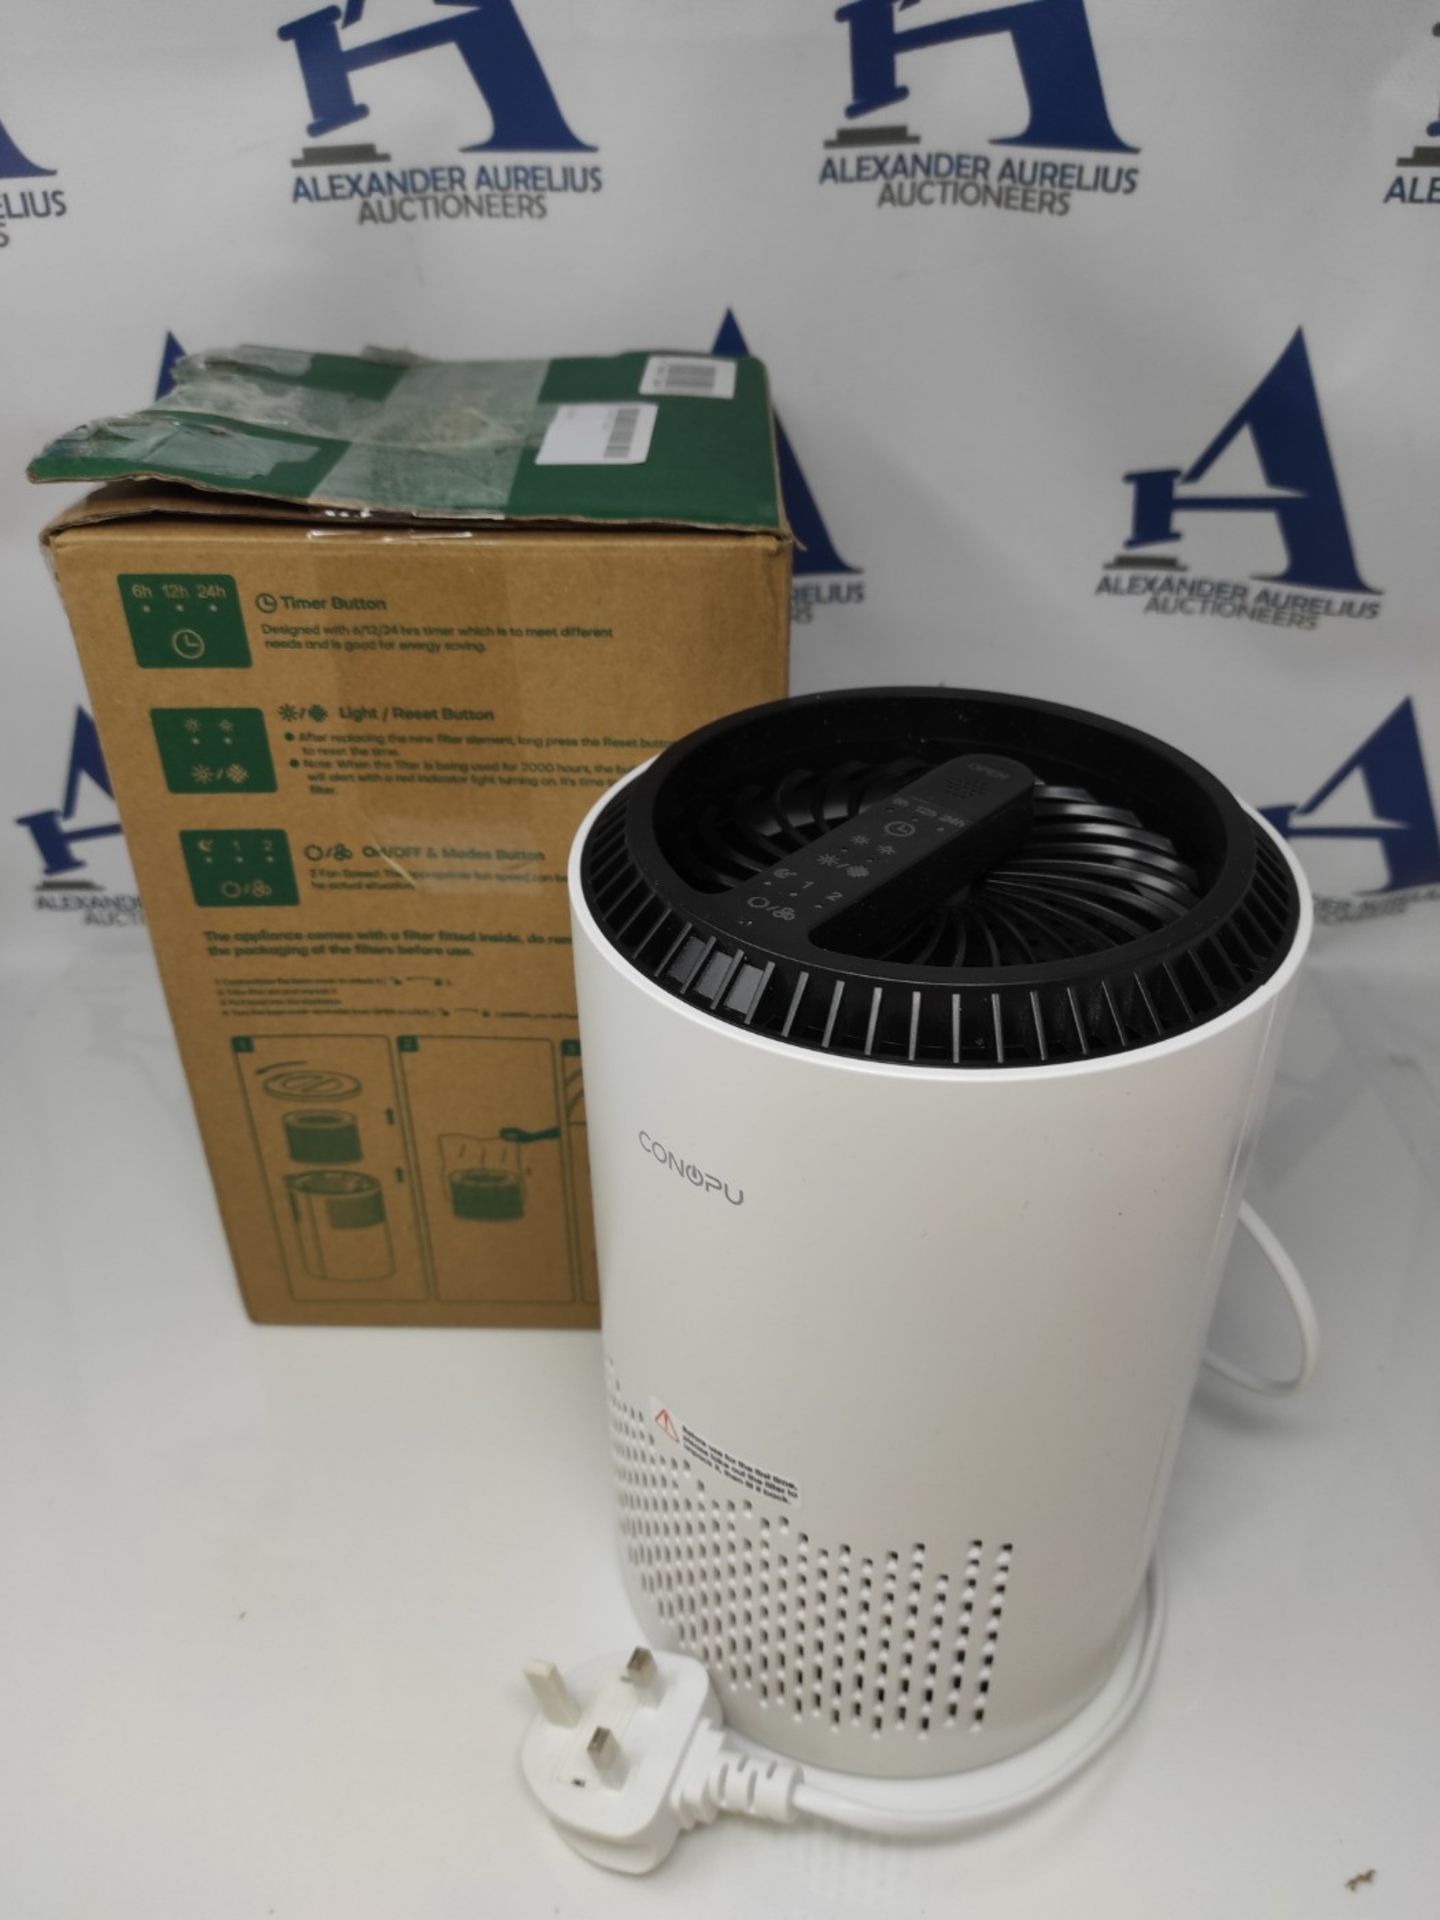 CONOPU Air Purifier for Home Bedroom with Hepa H13 99.97% Filter, Air Cleaner portable - Image 2 of 2